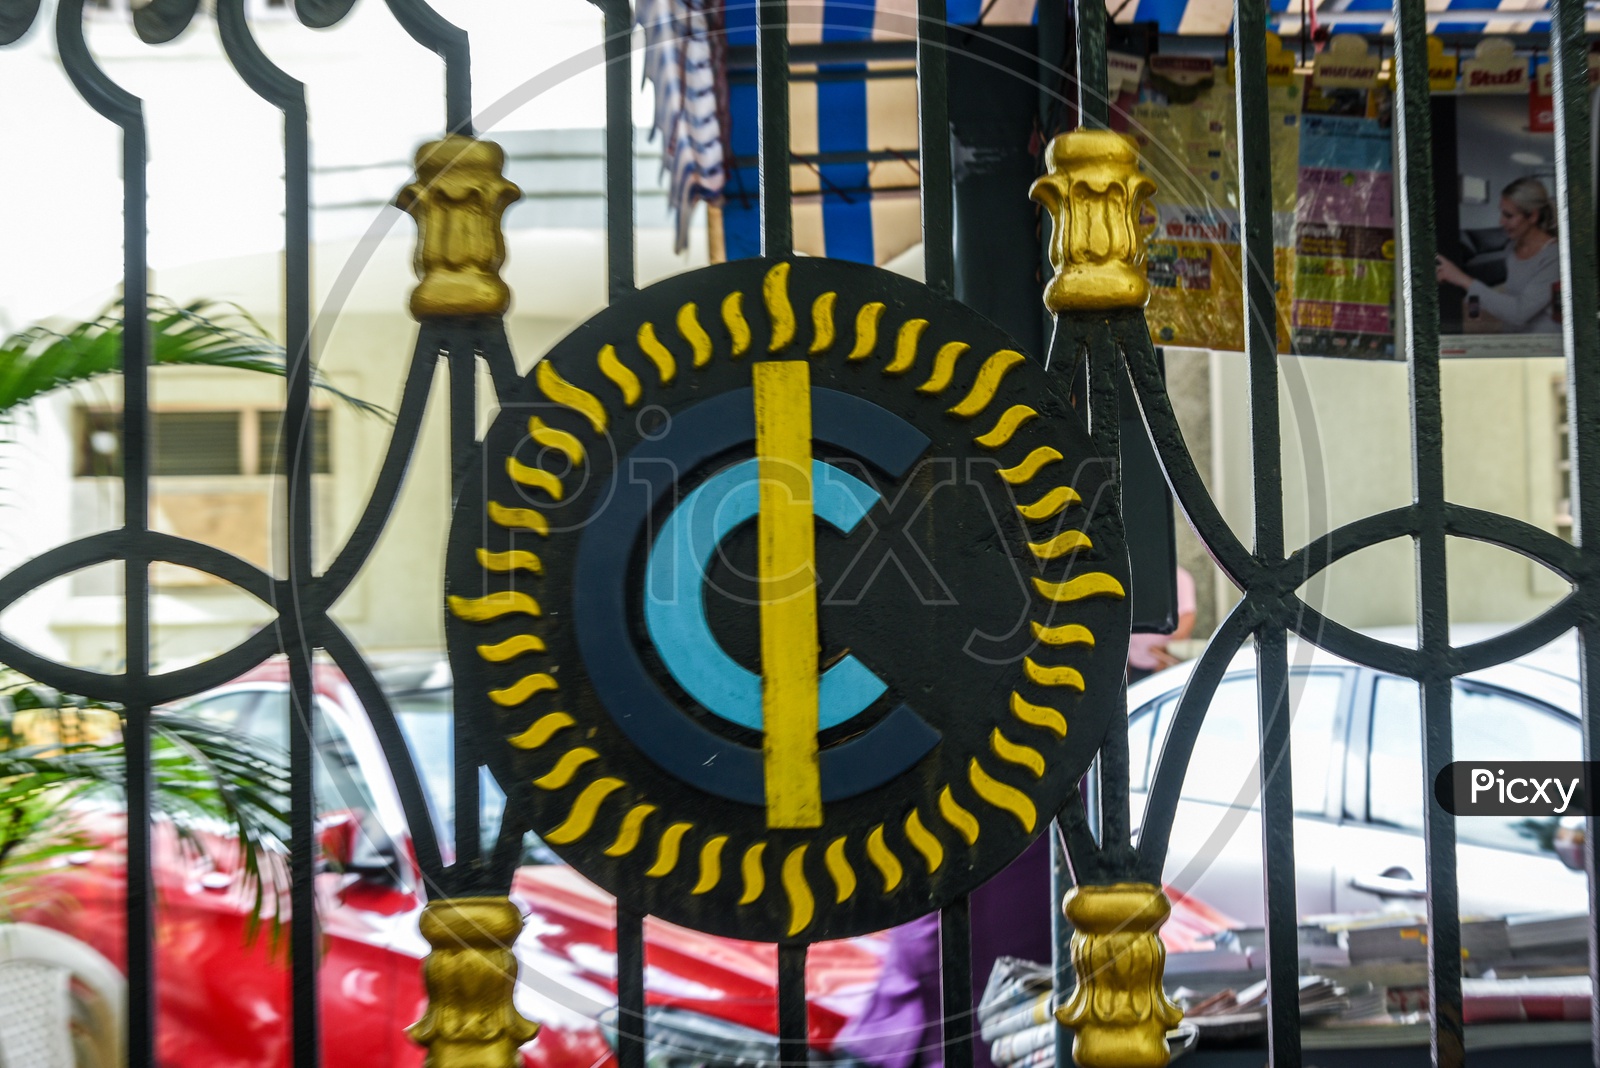 Logo of The Cricket Club of India on the entrance gate.